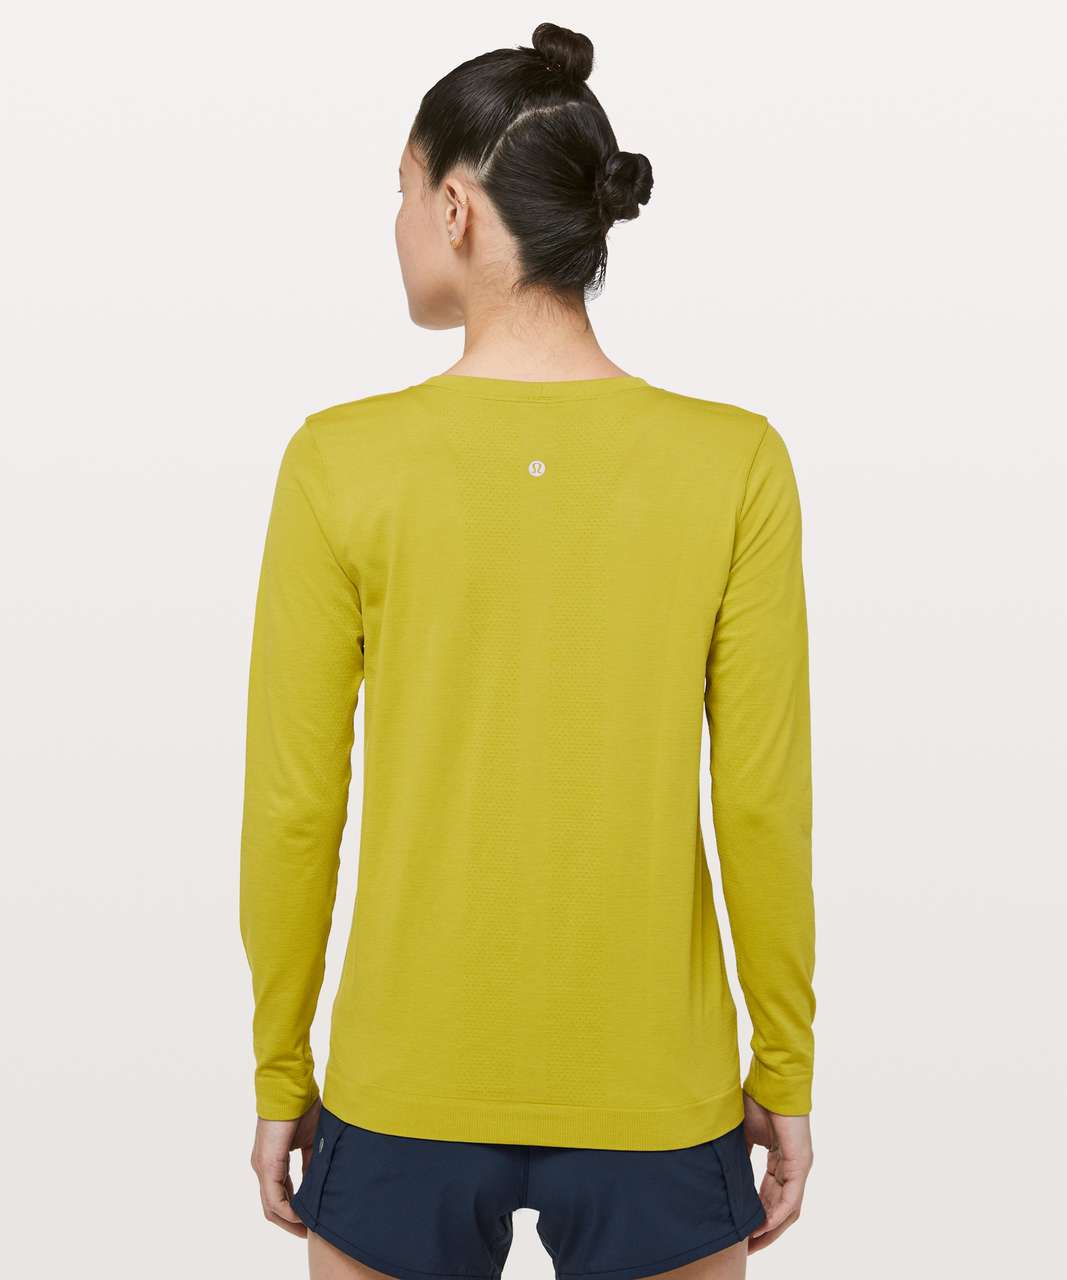 Lululemon Swiftly Tech Long Sleeve (Breeze) *Relaxed Fit - Golden Lime / Golden Lime